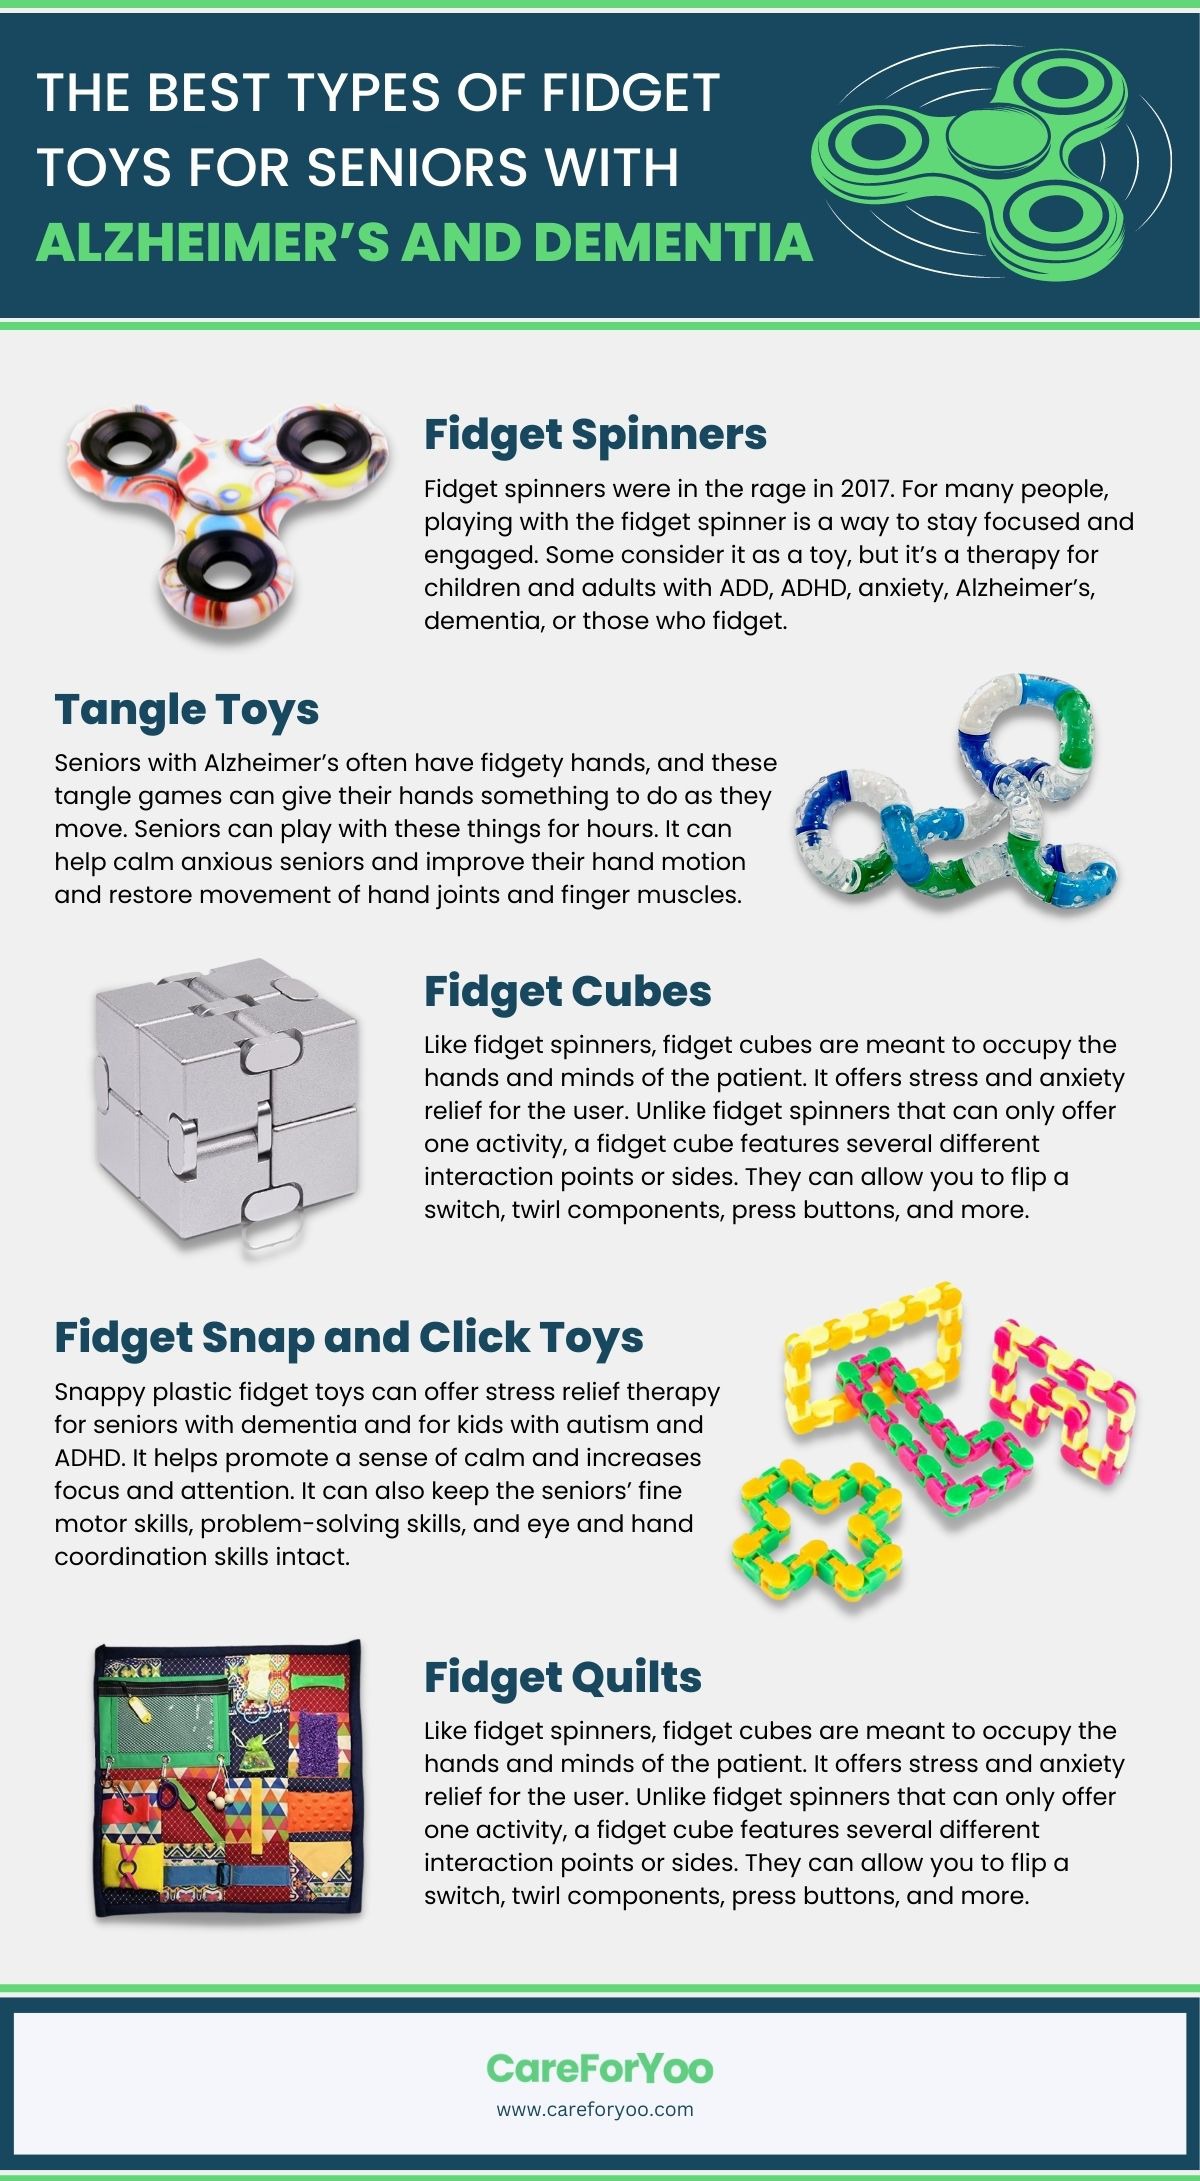 The-Best-Types-of-Fidget-Toys-for-Seniors-with-Alzheimers-and-Dementia